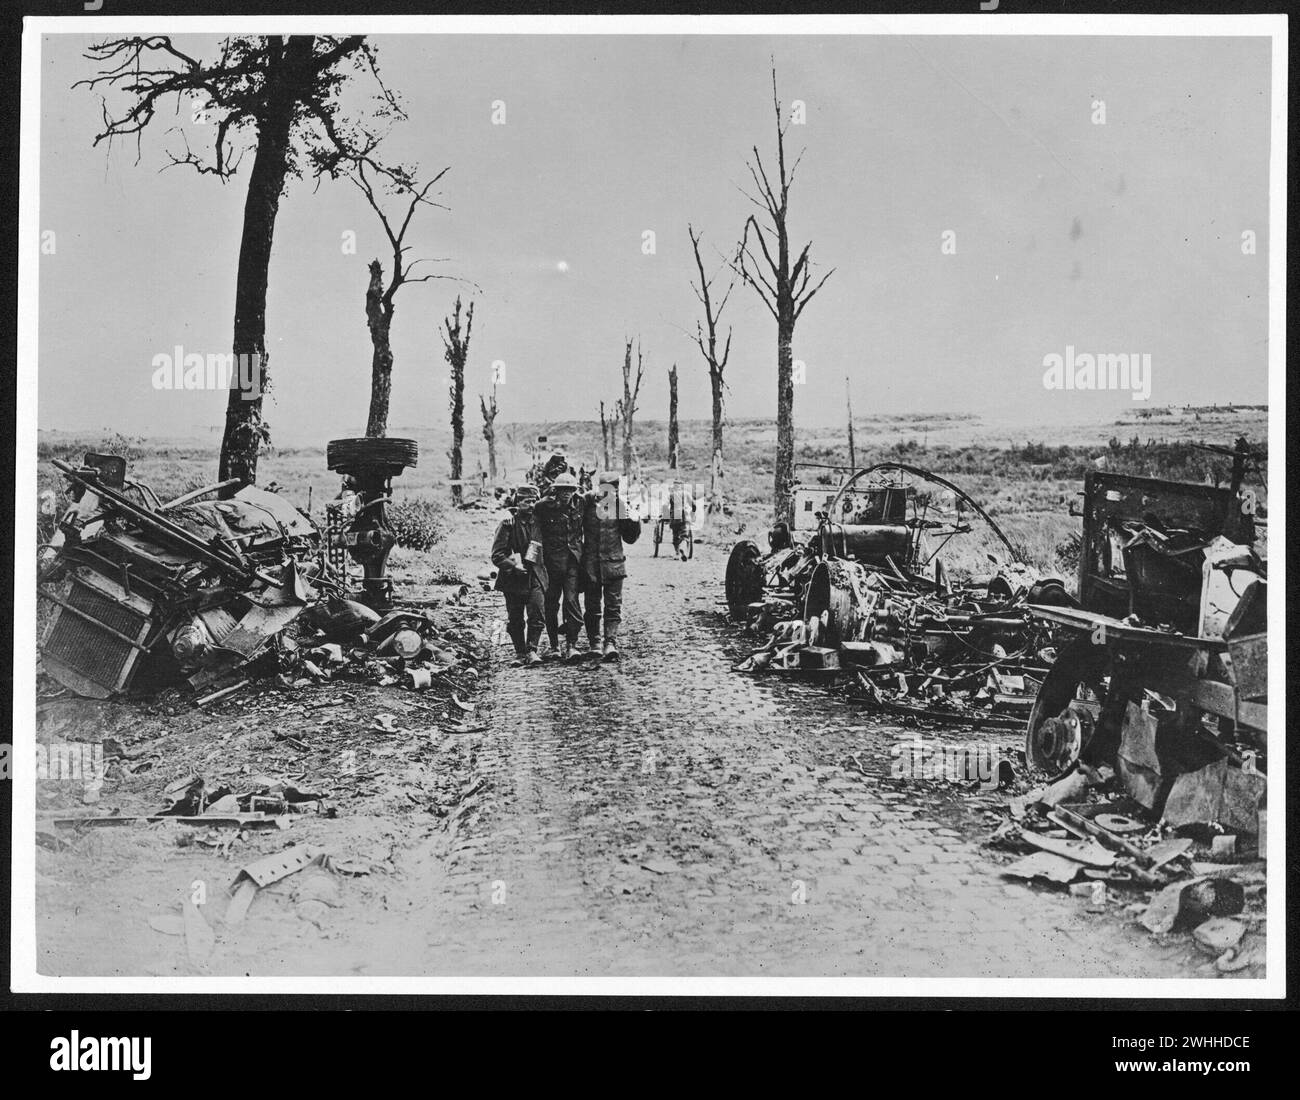 Summer 1918: German soldiers supporting an injured Canadian near Arras, in France, during World War I.  The destroyed vehicles and burnt trees framing the trio of men are, in contrast, a sharp reminder of war's destructiveness. Dates / between :26 August 1918-3 September 1918 Stock Photo